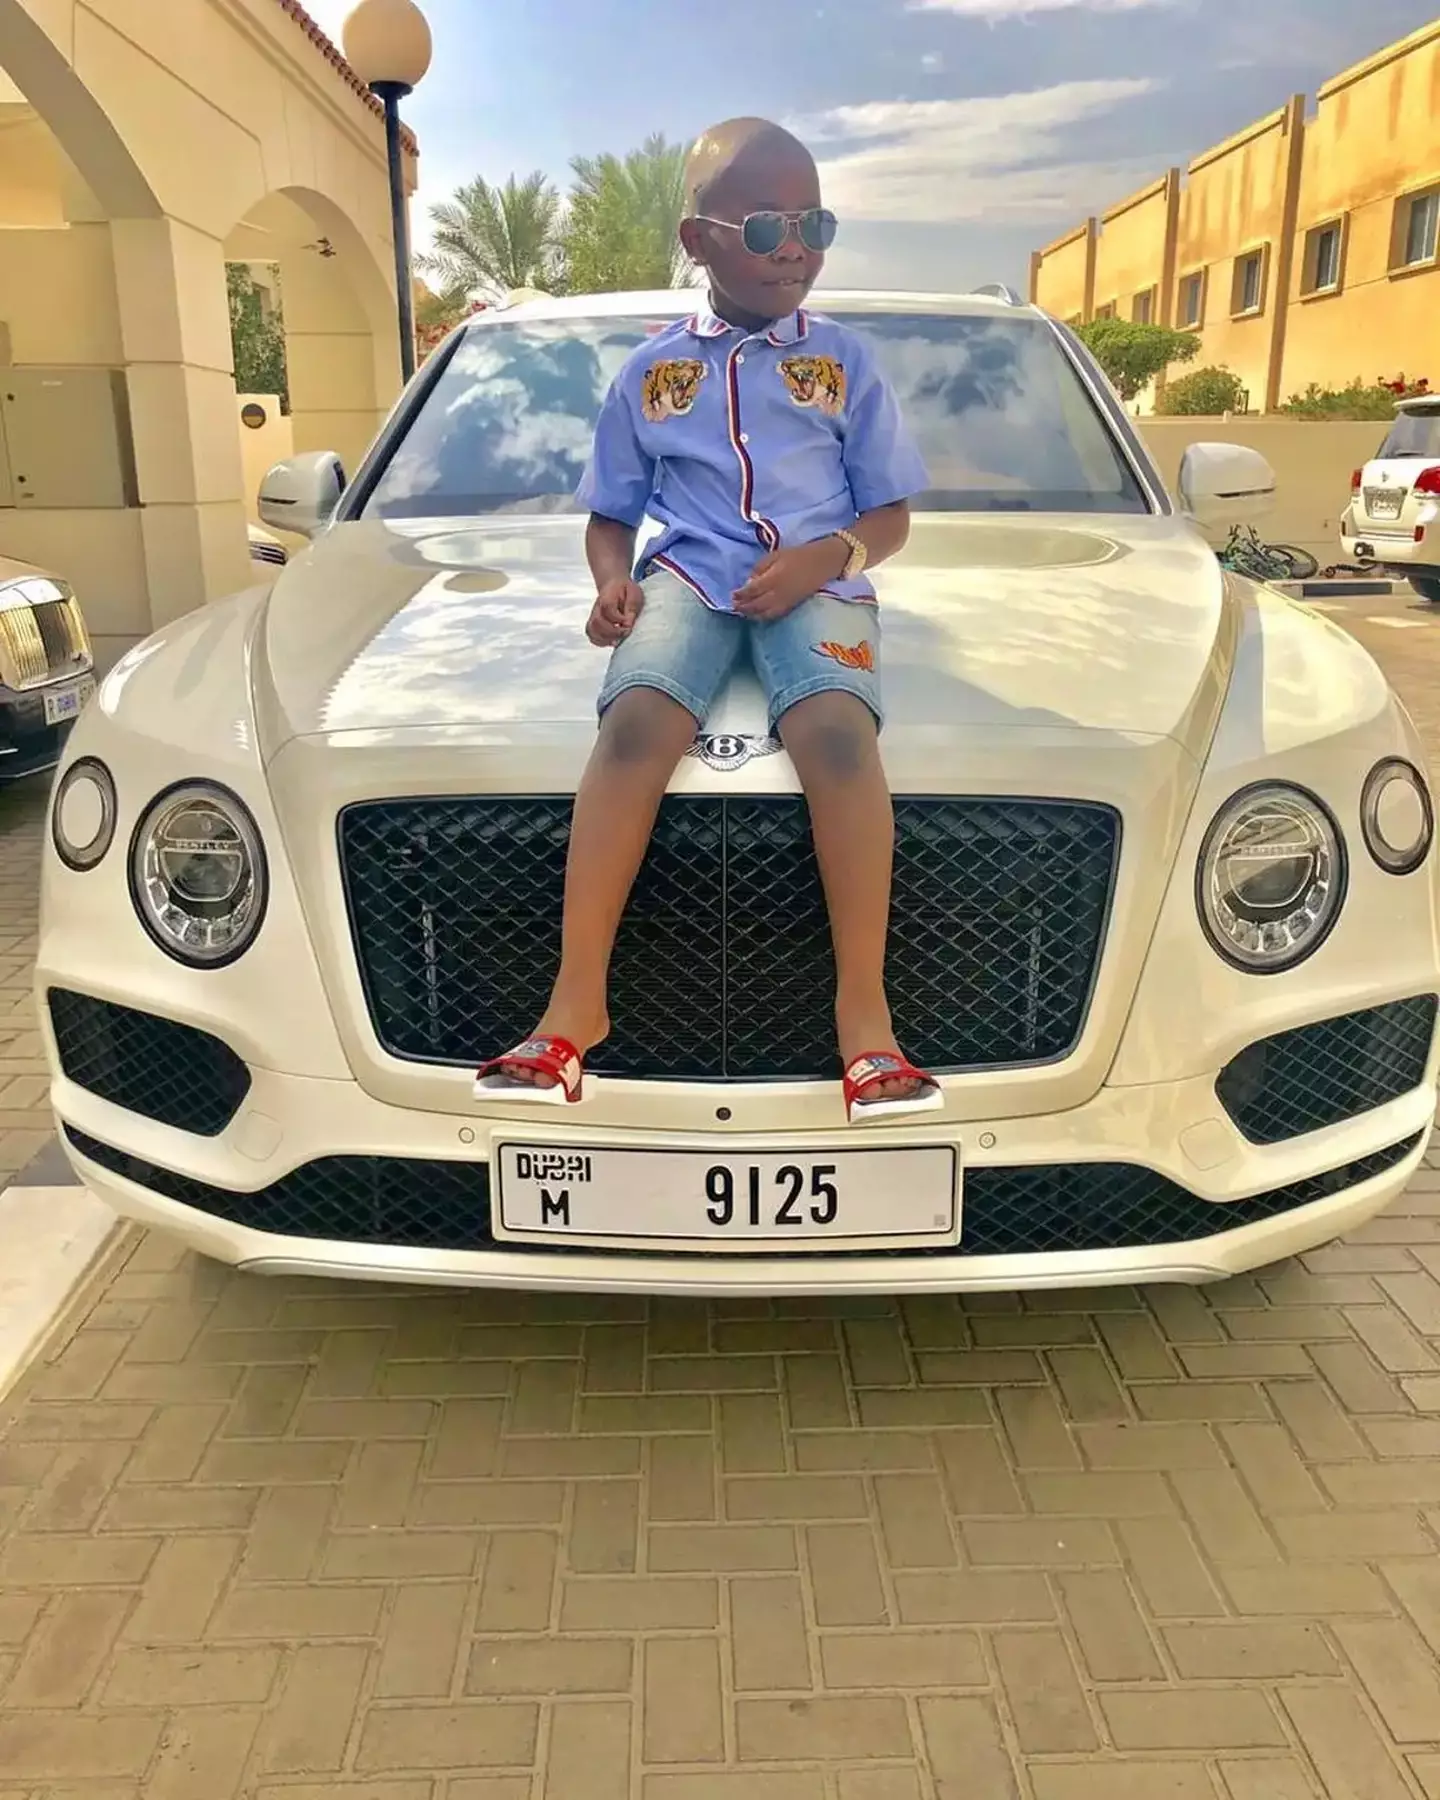 He is the son of multimillionaire Nigerian internet celebrity Ismailia Mustapha.